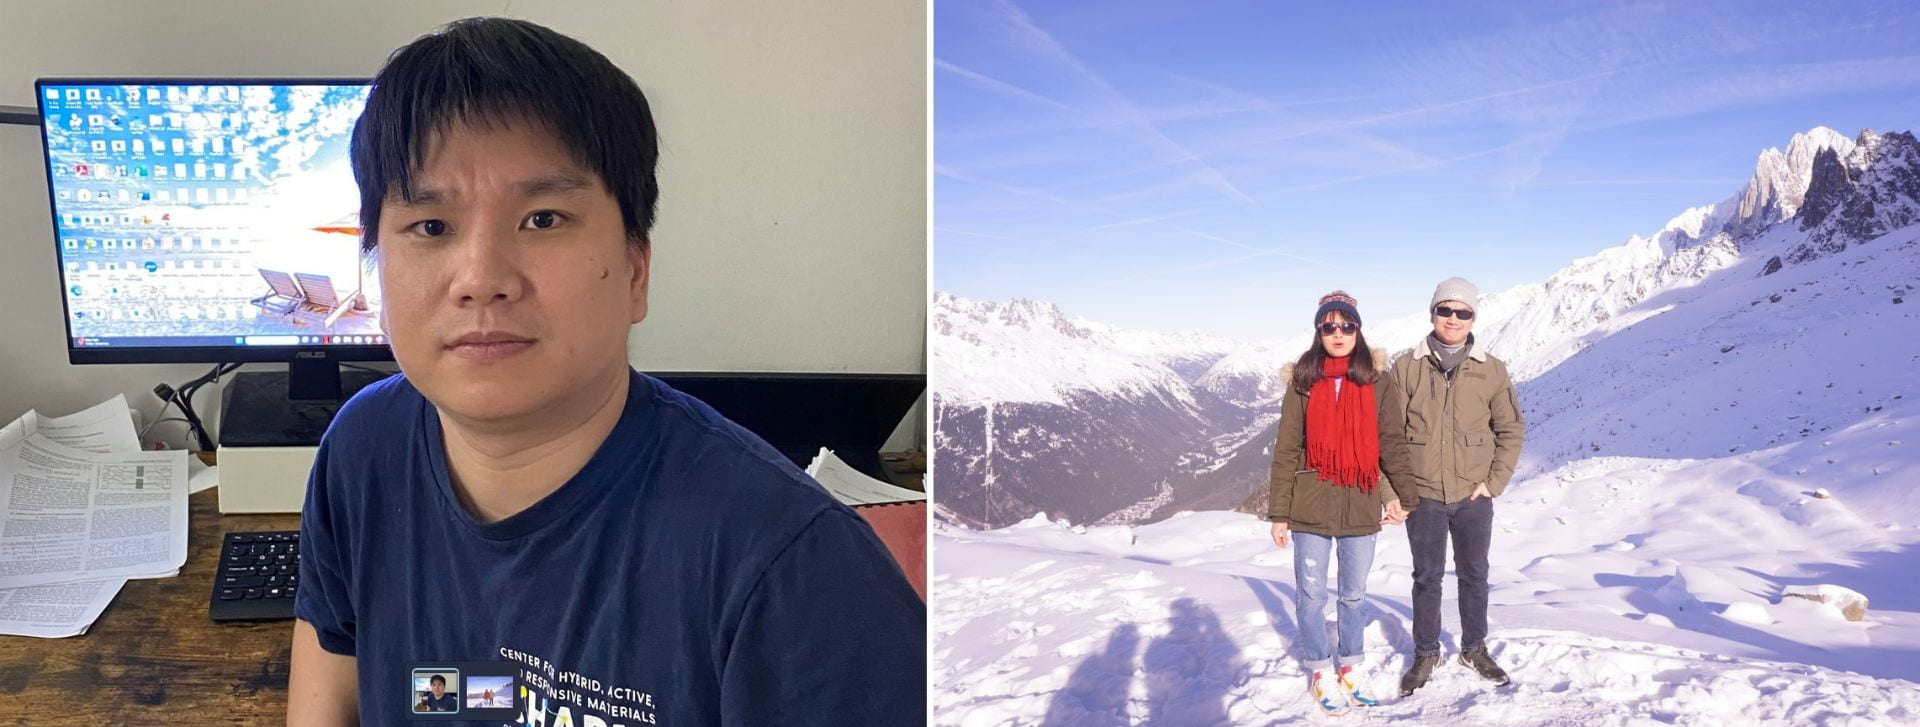 A 2-picture collage, the left image is of Dr. Quang To at his desk looking at the camera, the right is Dr. To with another person taking a picture together at the top of a snowy mountain.